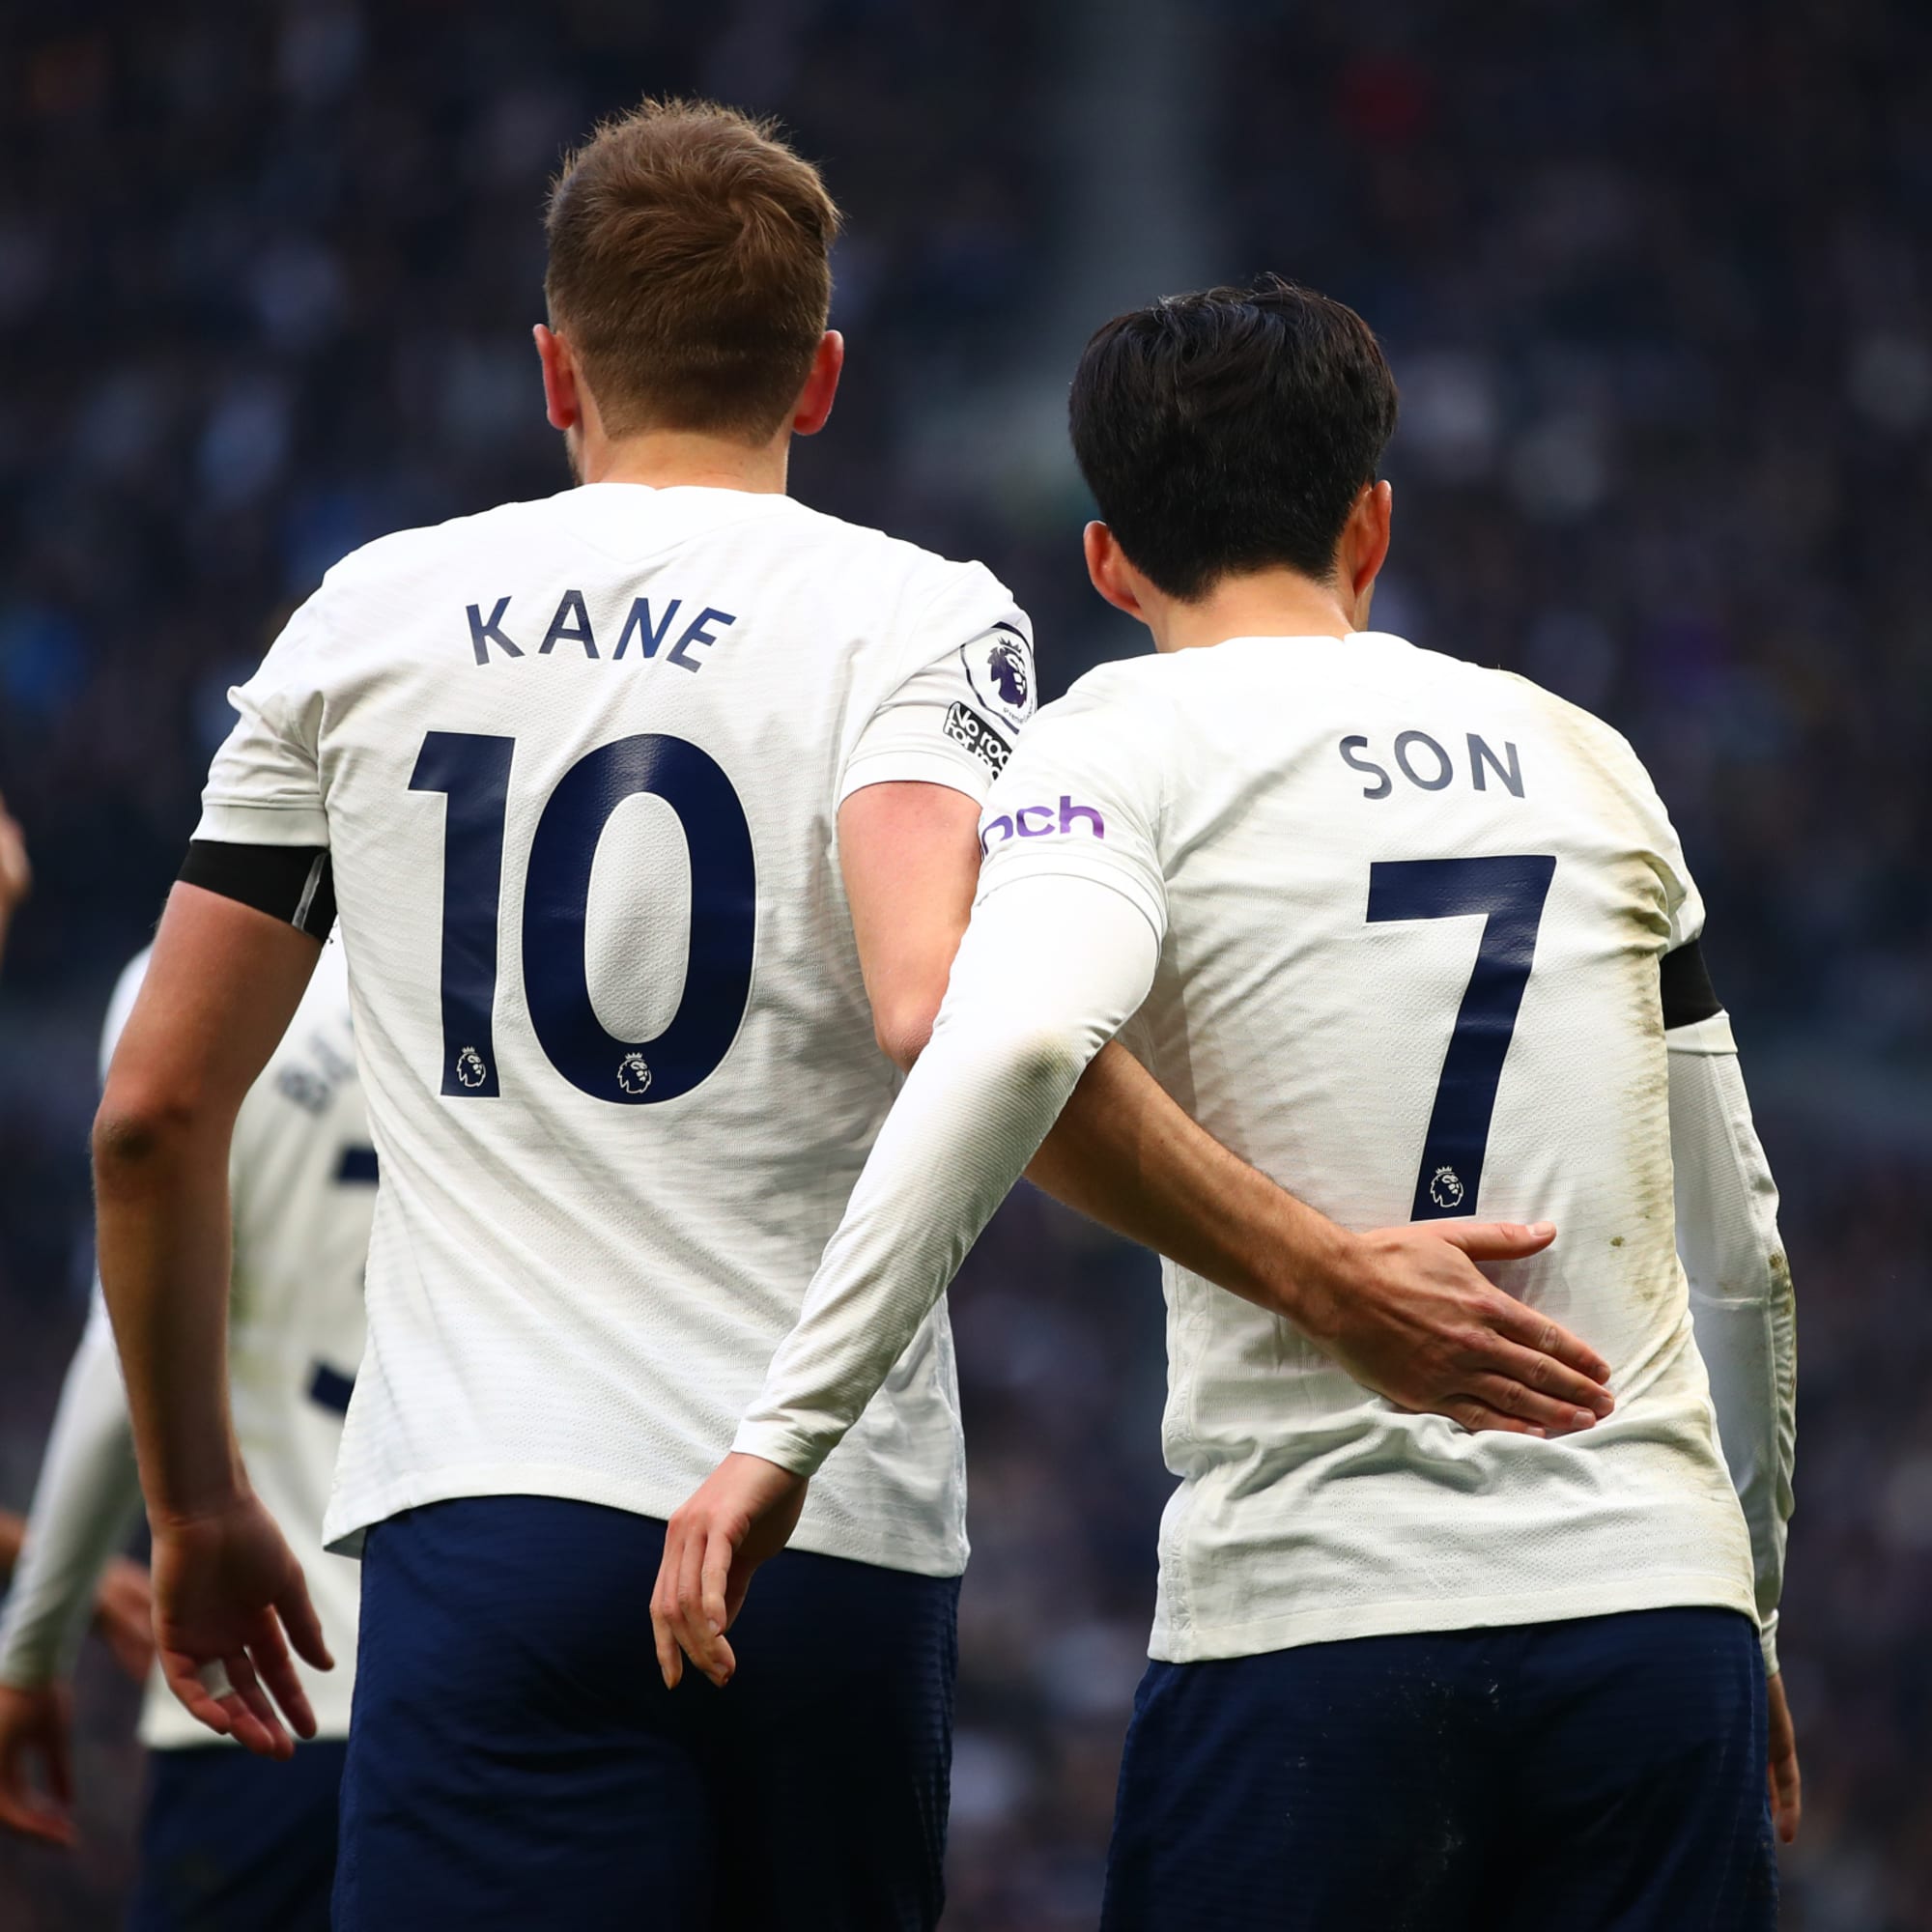 Convincing Tottenham win sets up grandstand finish in fight for top four